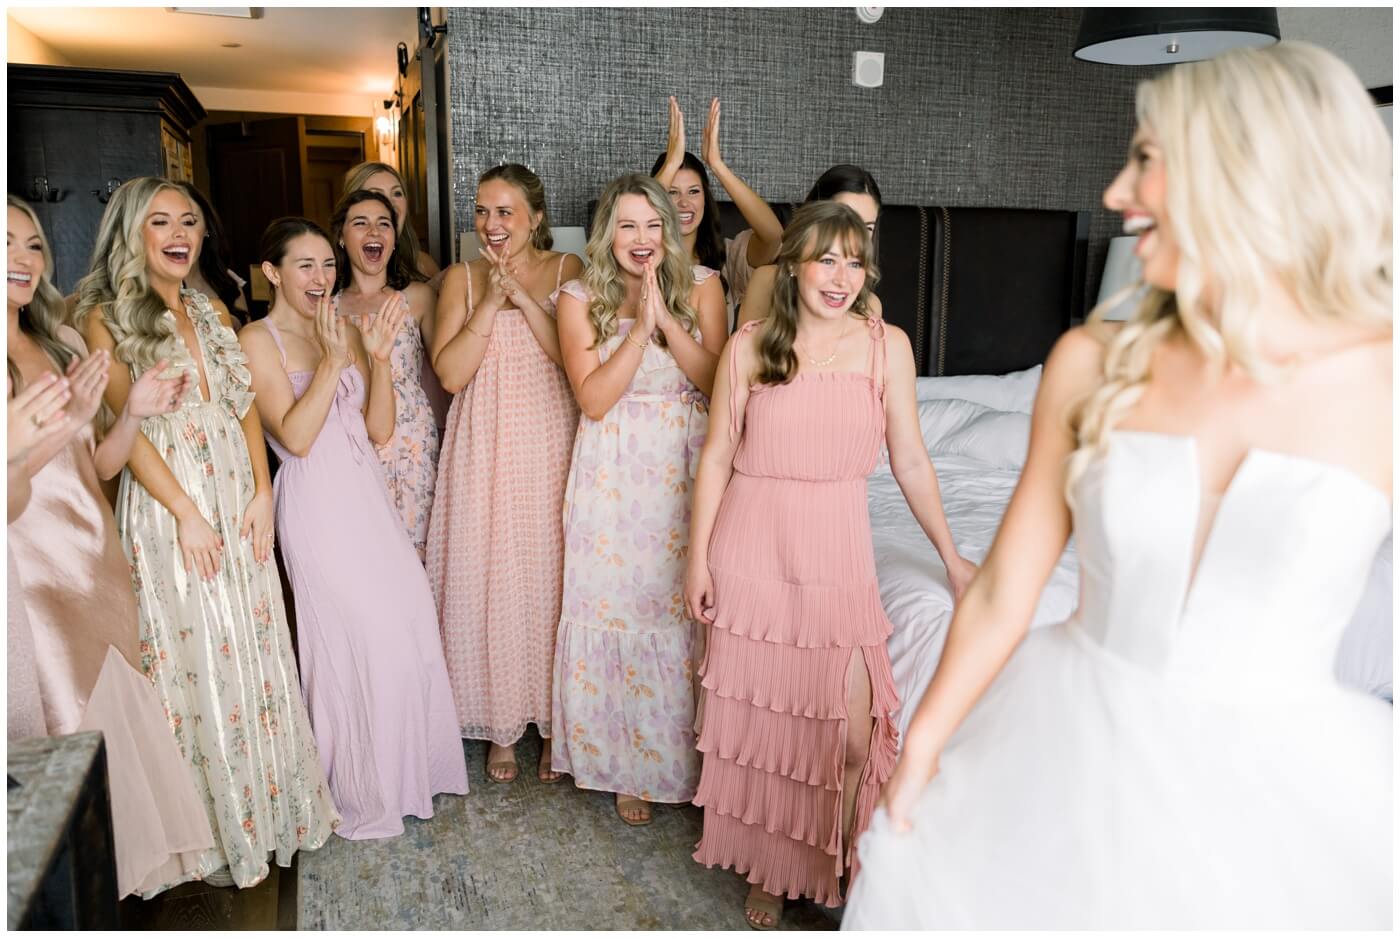 Bridesmaids smile and cheer as they see the bride on her wedding day at Hotel Drover